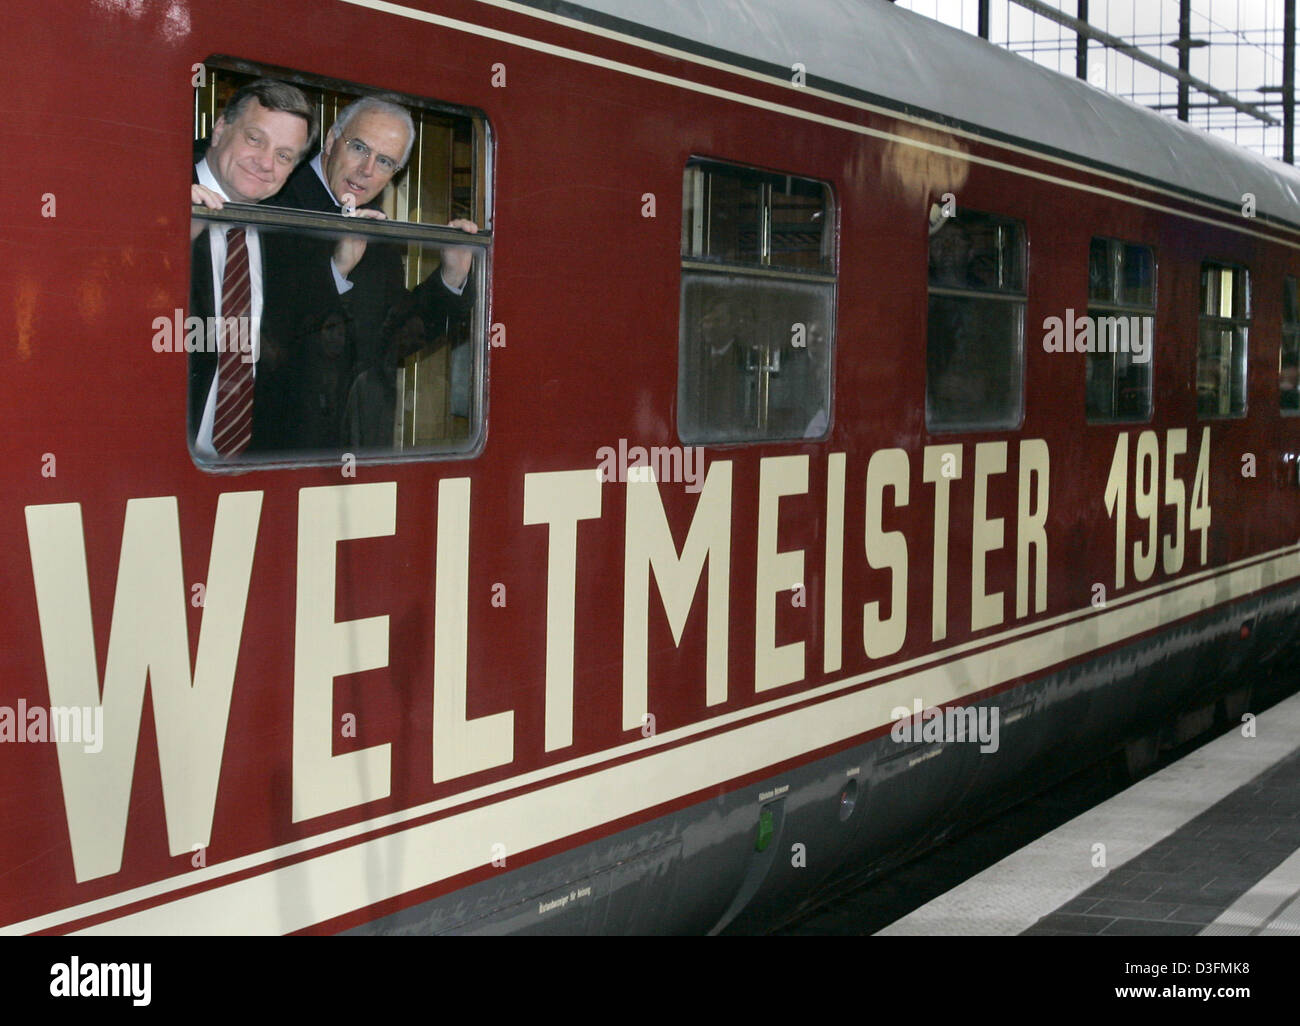 (dpa) - Hartmut Mehdorn (L), chairman of the Deutsche Bahn (DB, German railway), and Franz Beckenbauer, head of the 2006 FIFA World Cup Organizing Committee, look out of a window of the original train with which the first German World Cup winners in 1954 toured the country in Berlin, Germany, 7 December 2004. The Deutsche Bahn has been selected as the final national sponsor for the Stock Photo